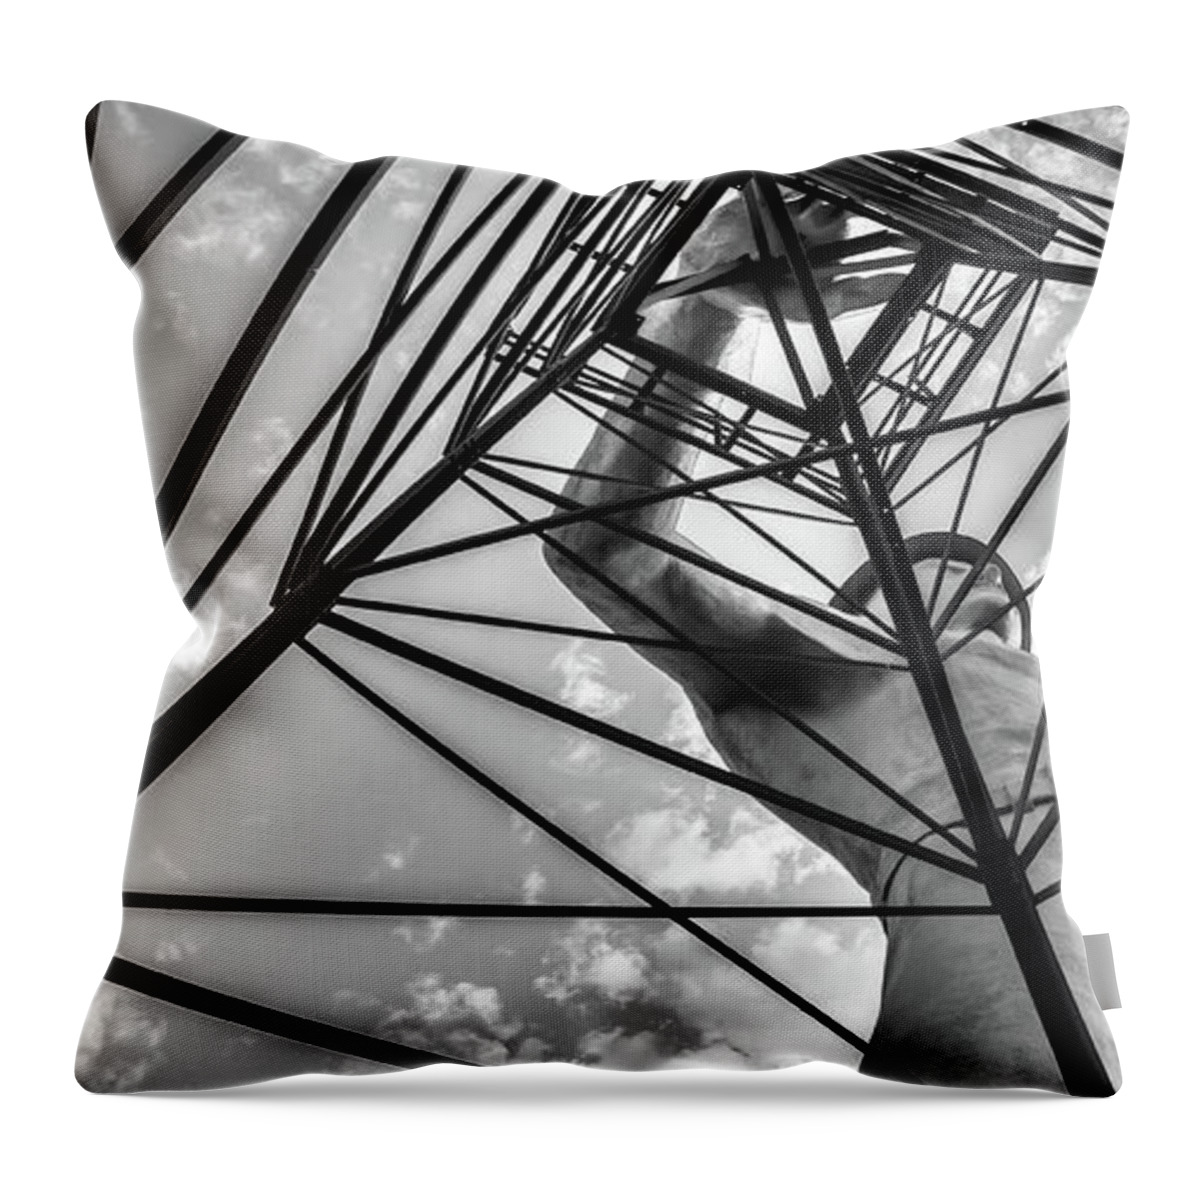 Tulsa Driller Throw Pillow featuring the photograph Tulsa Driller On Oil Derrick in Black and White Panorama by Gregory Ballos